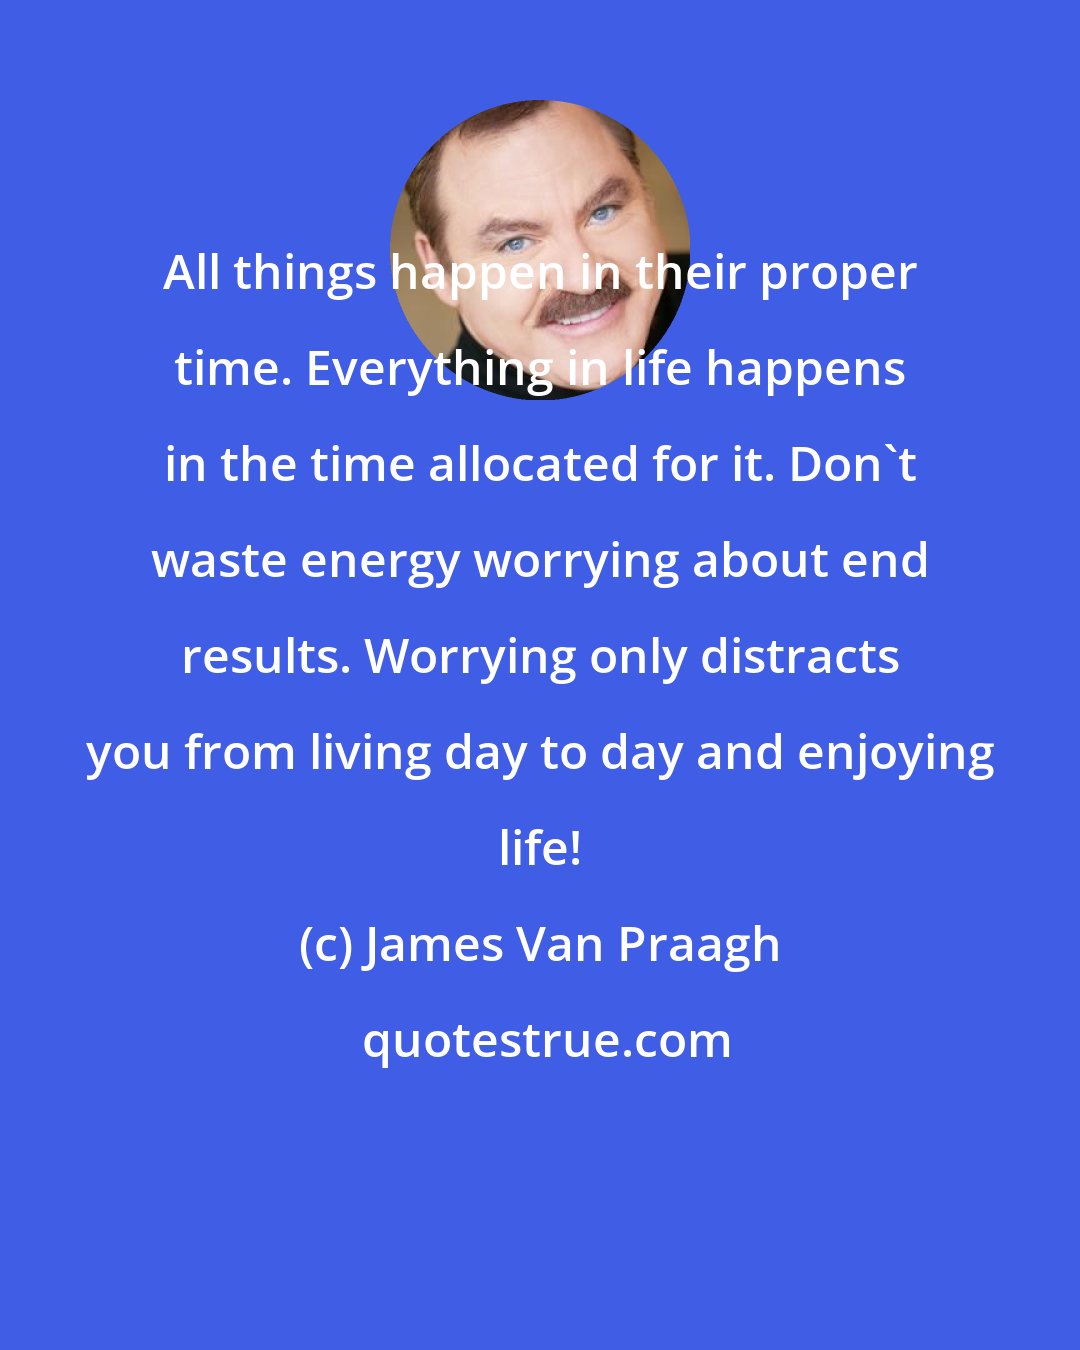 James Van Praagh: All things happen in their proper time. Everything in life happens in the time allocated for it. Don't waste energy worrying about end results. Worrying only distracts you from living day to day and enjoying life!